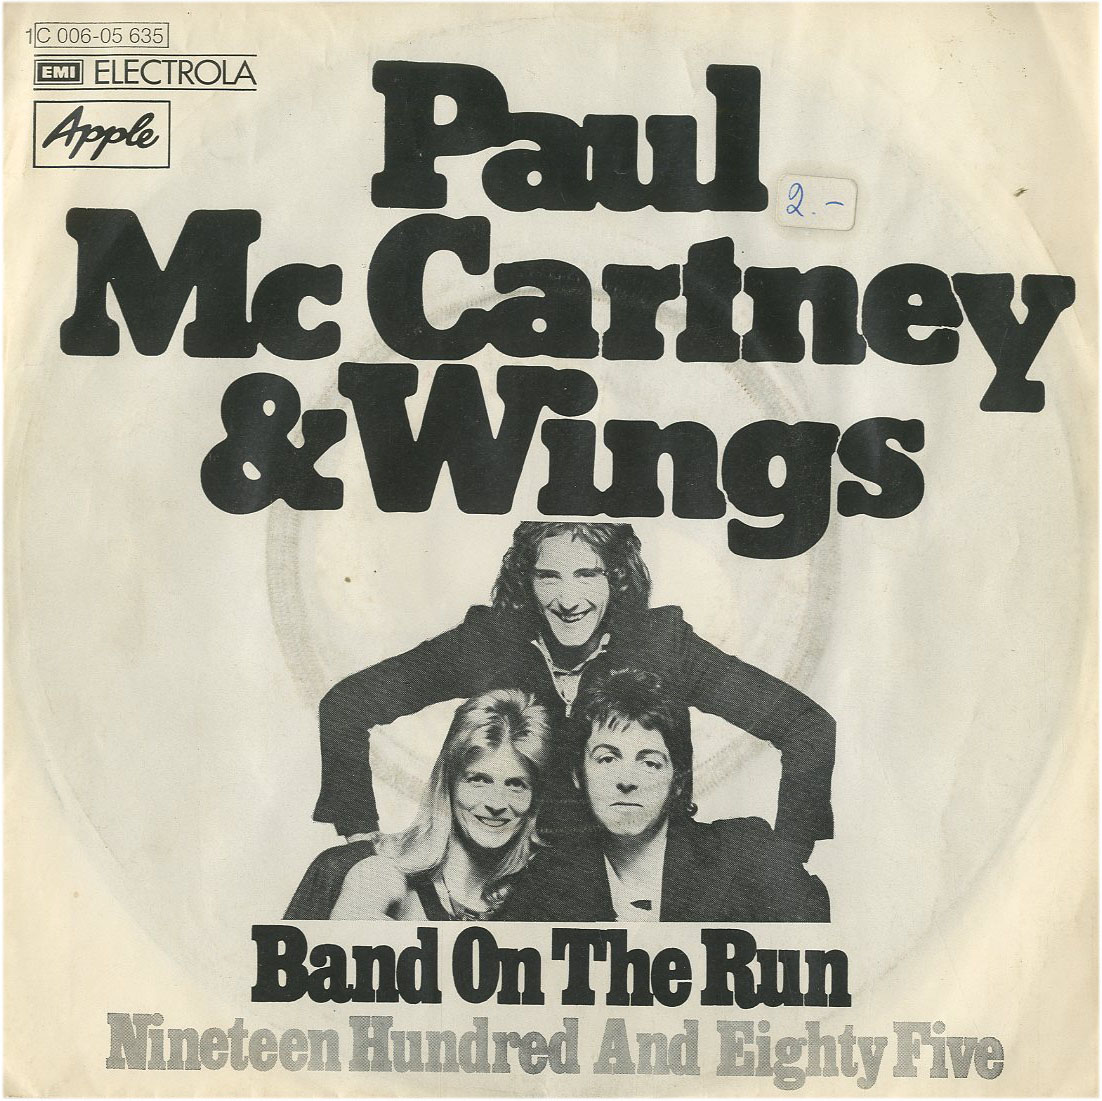 Albumcover (Paul McCartney &) Wings - Band On The Run / Ninteen Hundred And Eighty Five